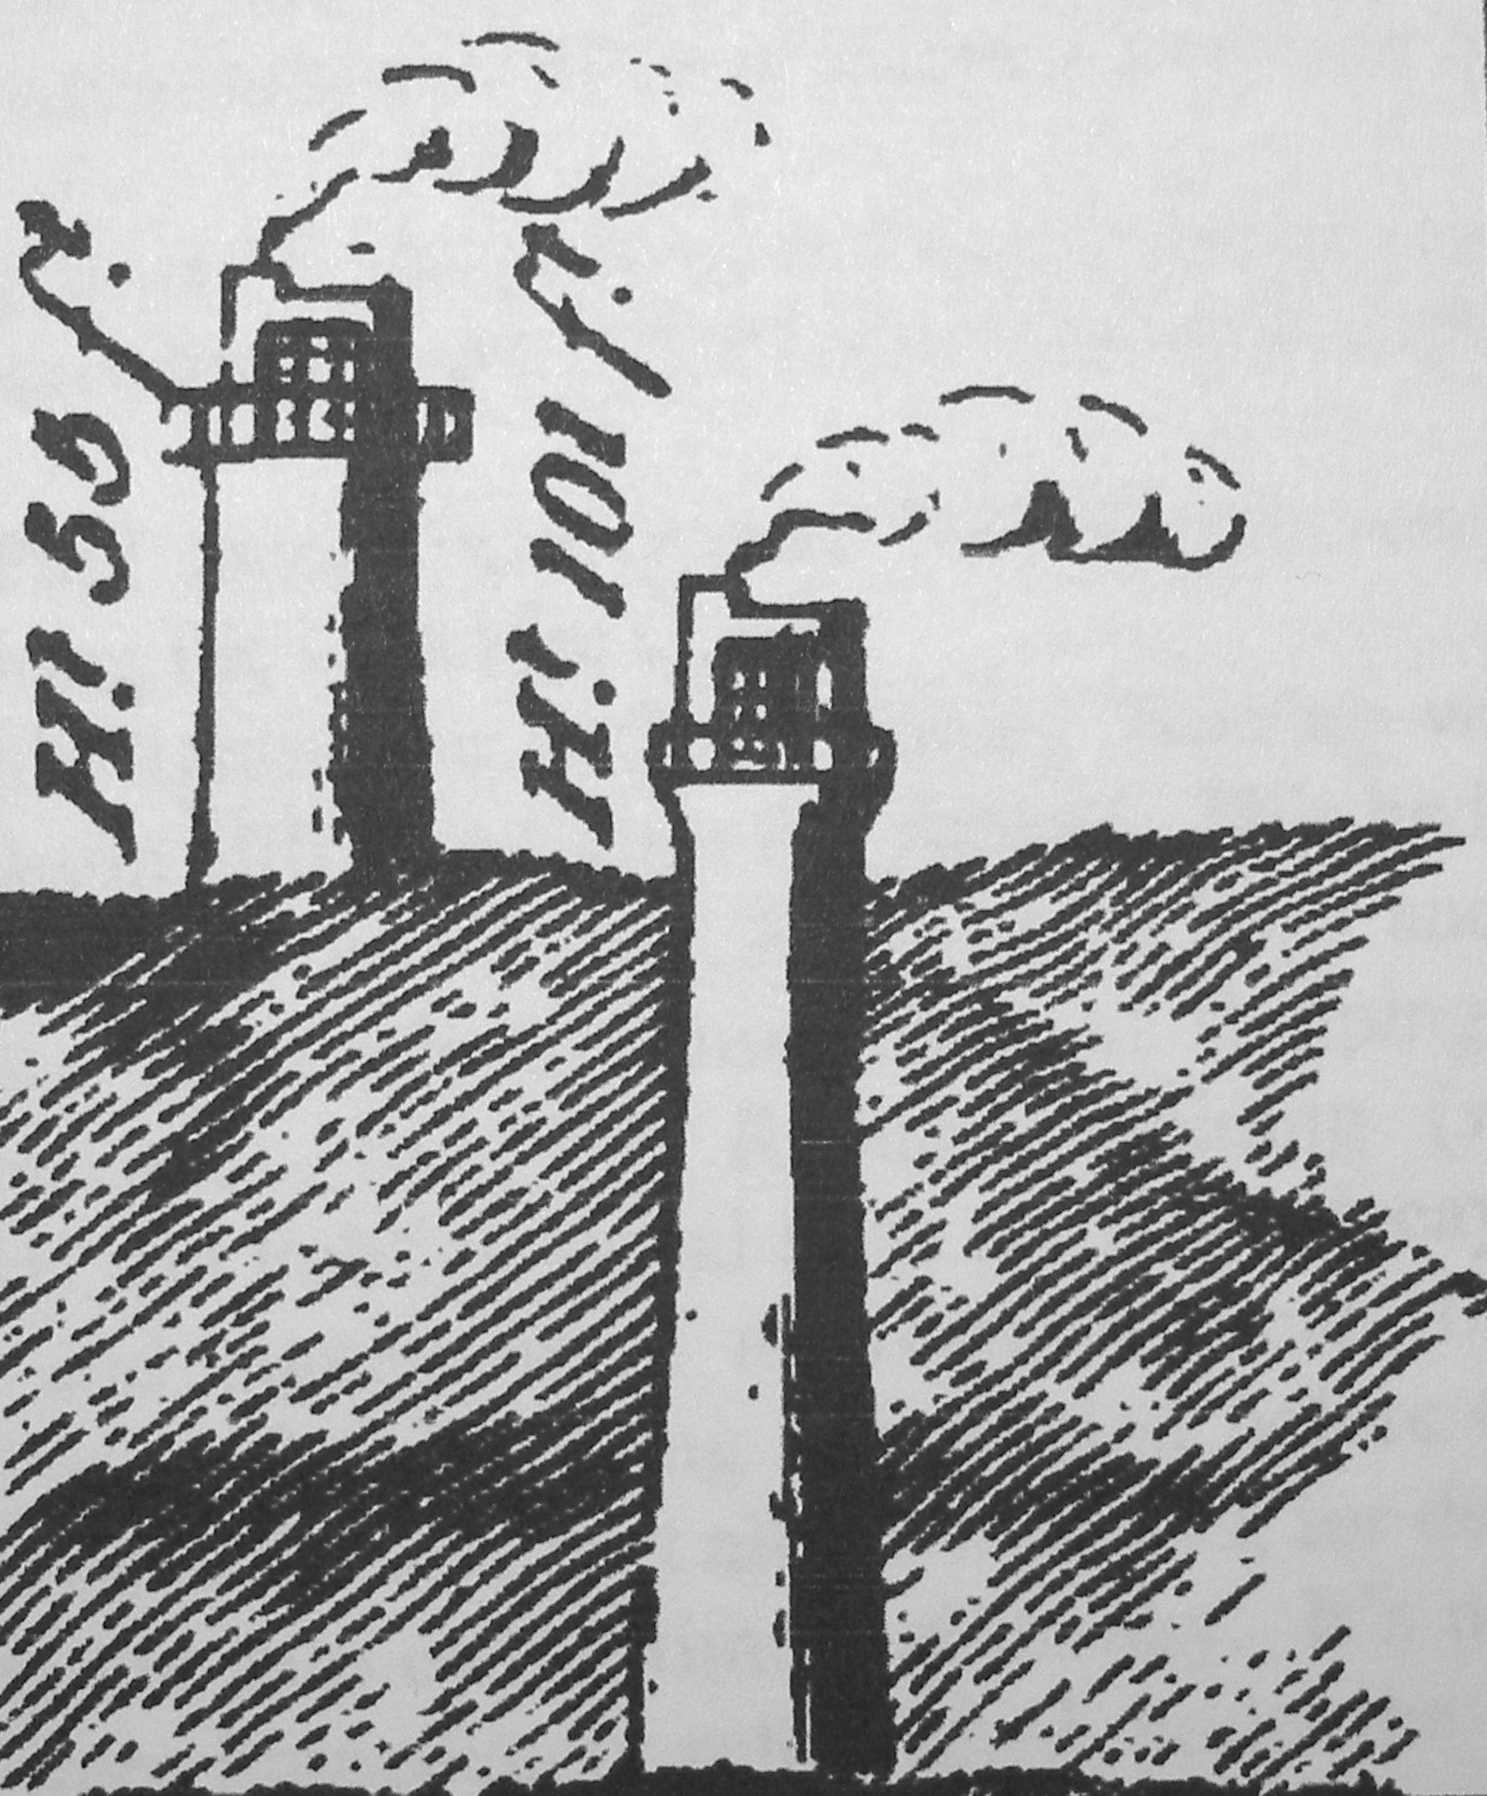 Bidston and Leasowe lighthouses (from on old chart)